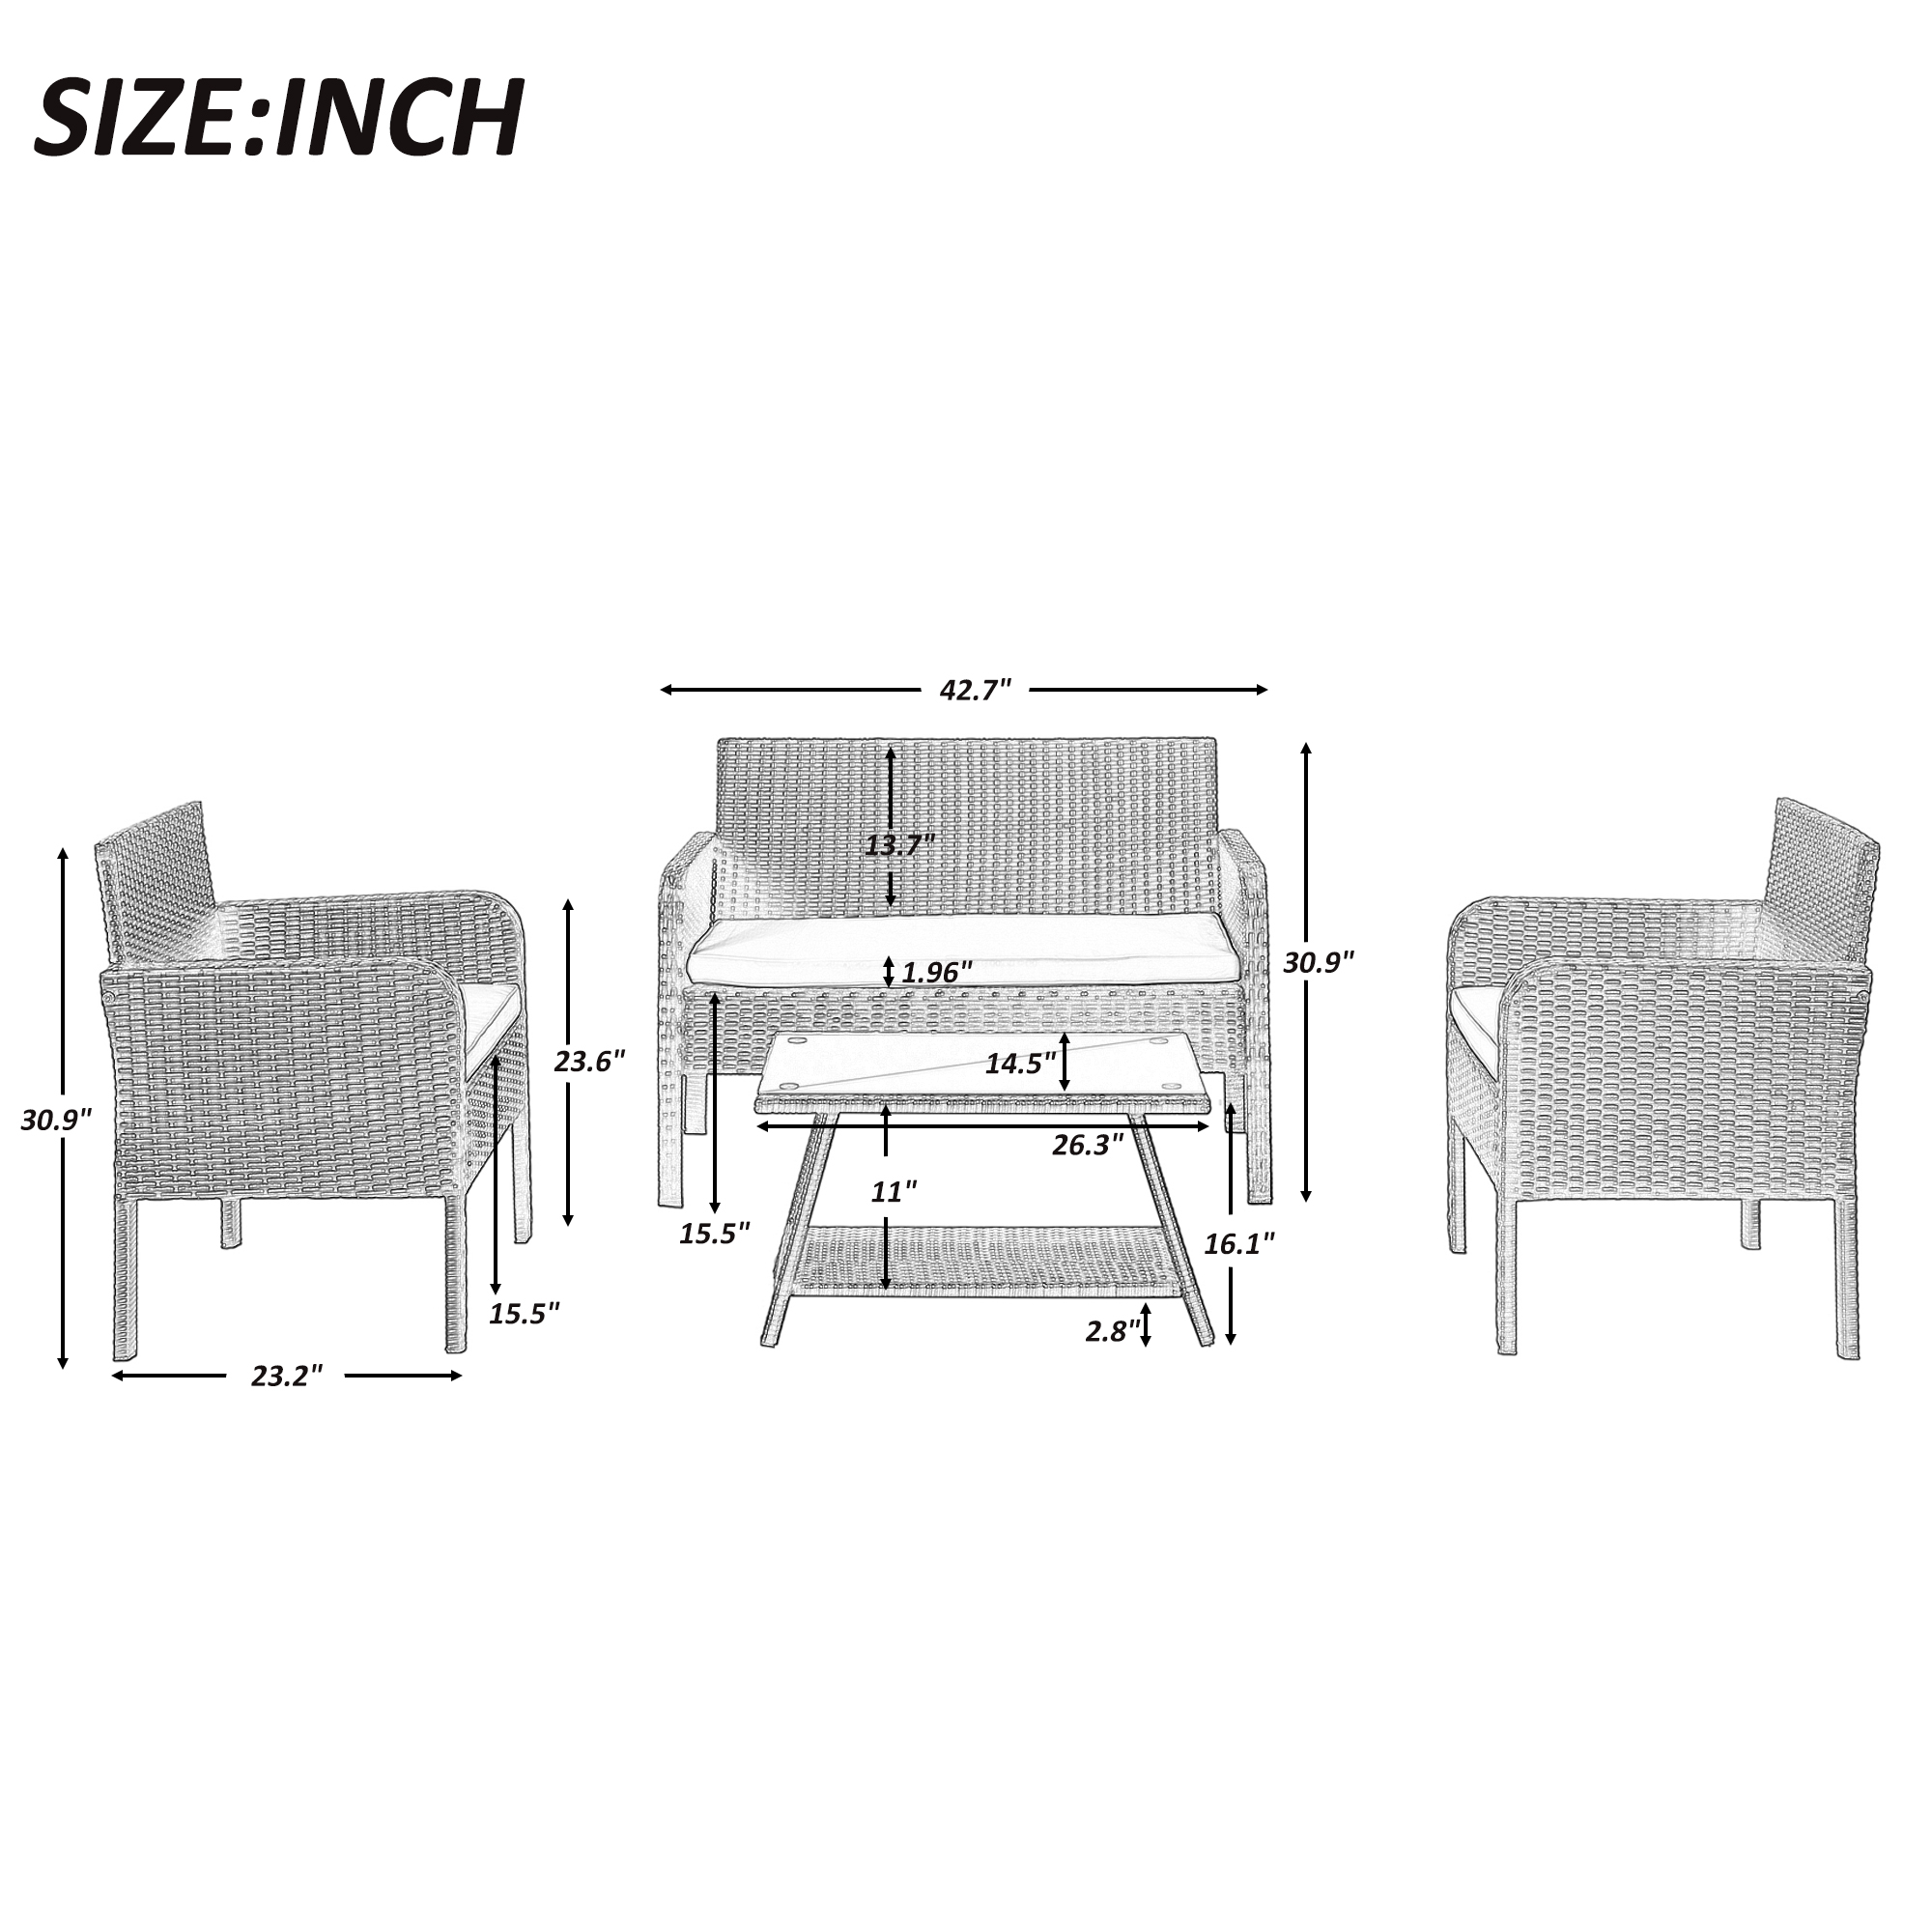 4 Piece Outdoor Patio Furniture Set, PE Rattan Wicker Sofa Set, Outdoor Sectional Furniture Chair Set with Cushions and Tea Table, Wicker Conversation Set for Backyard Lawn Porch Garden Poolside, B298 - image 3 of 7